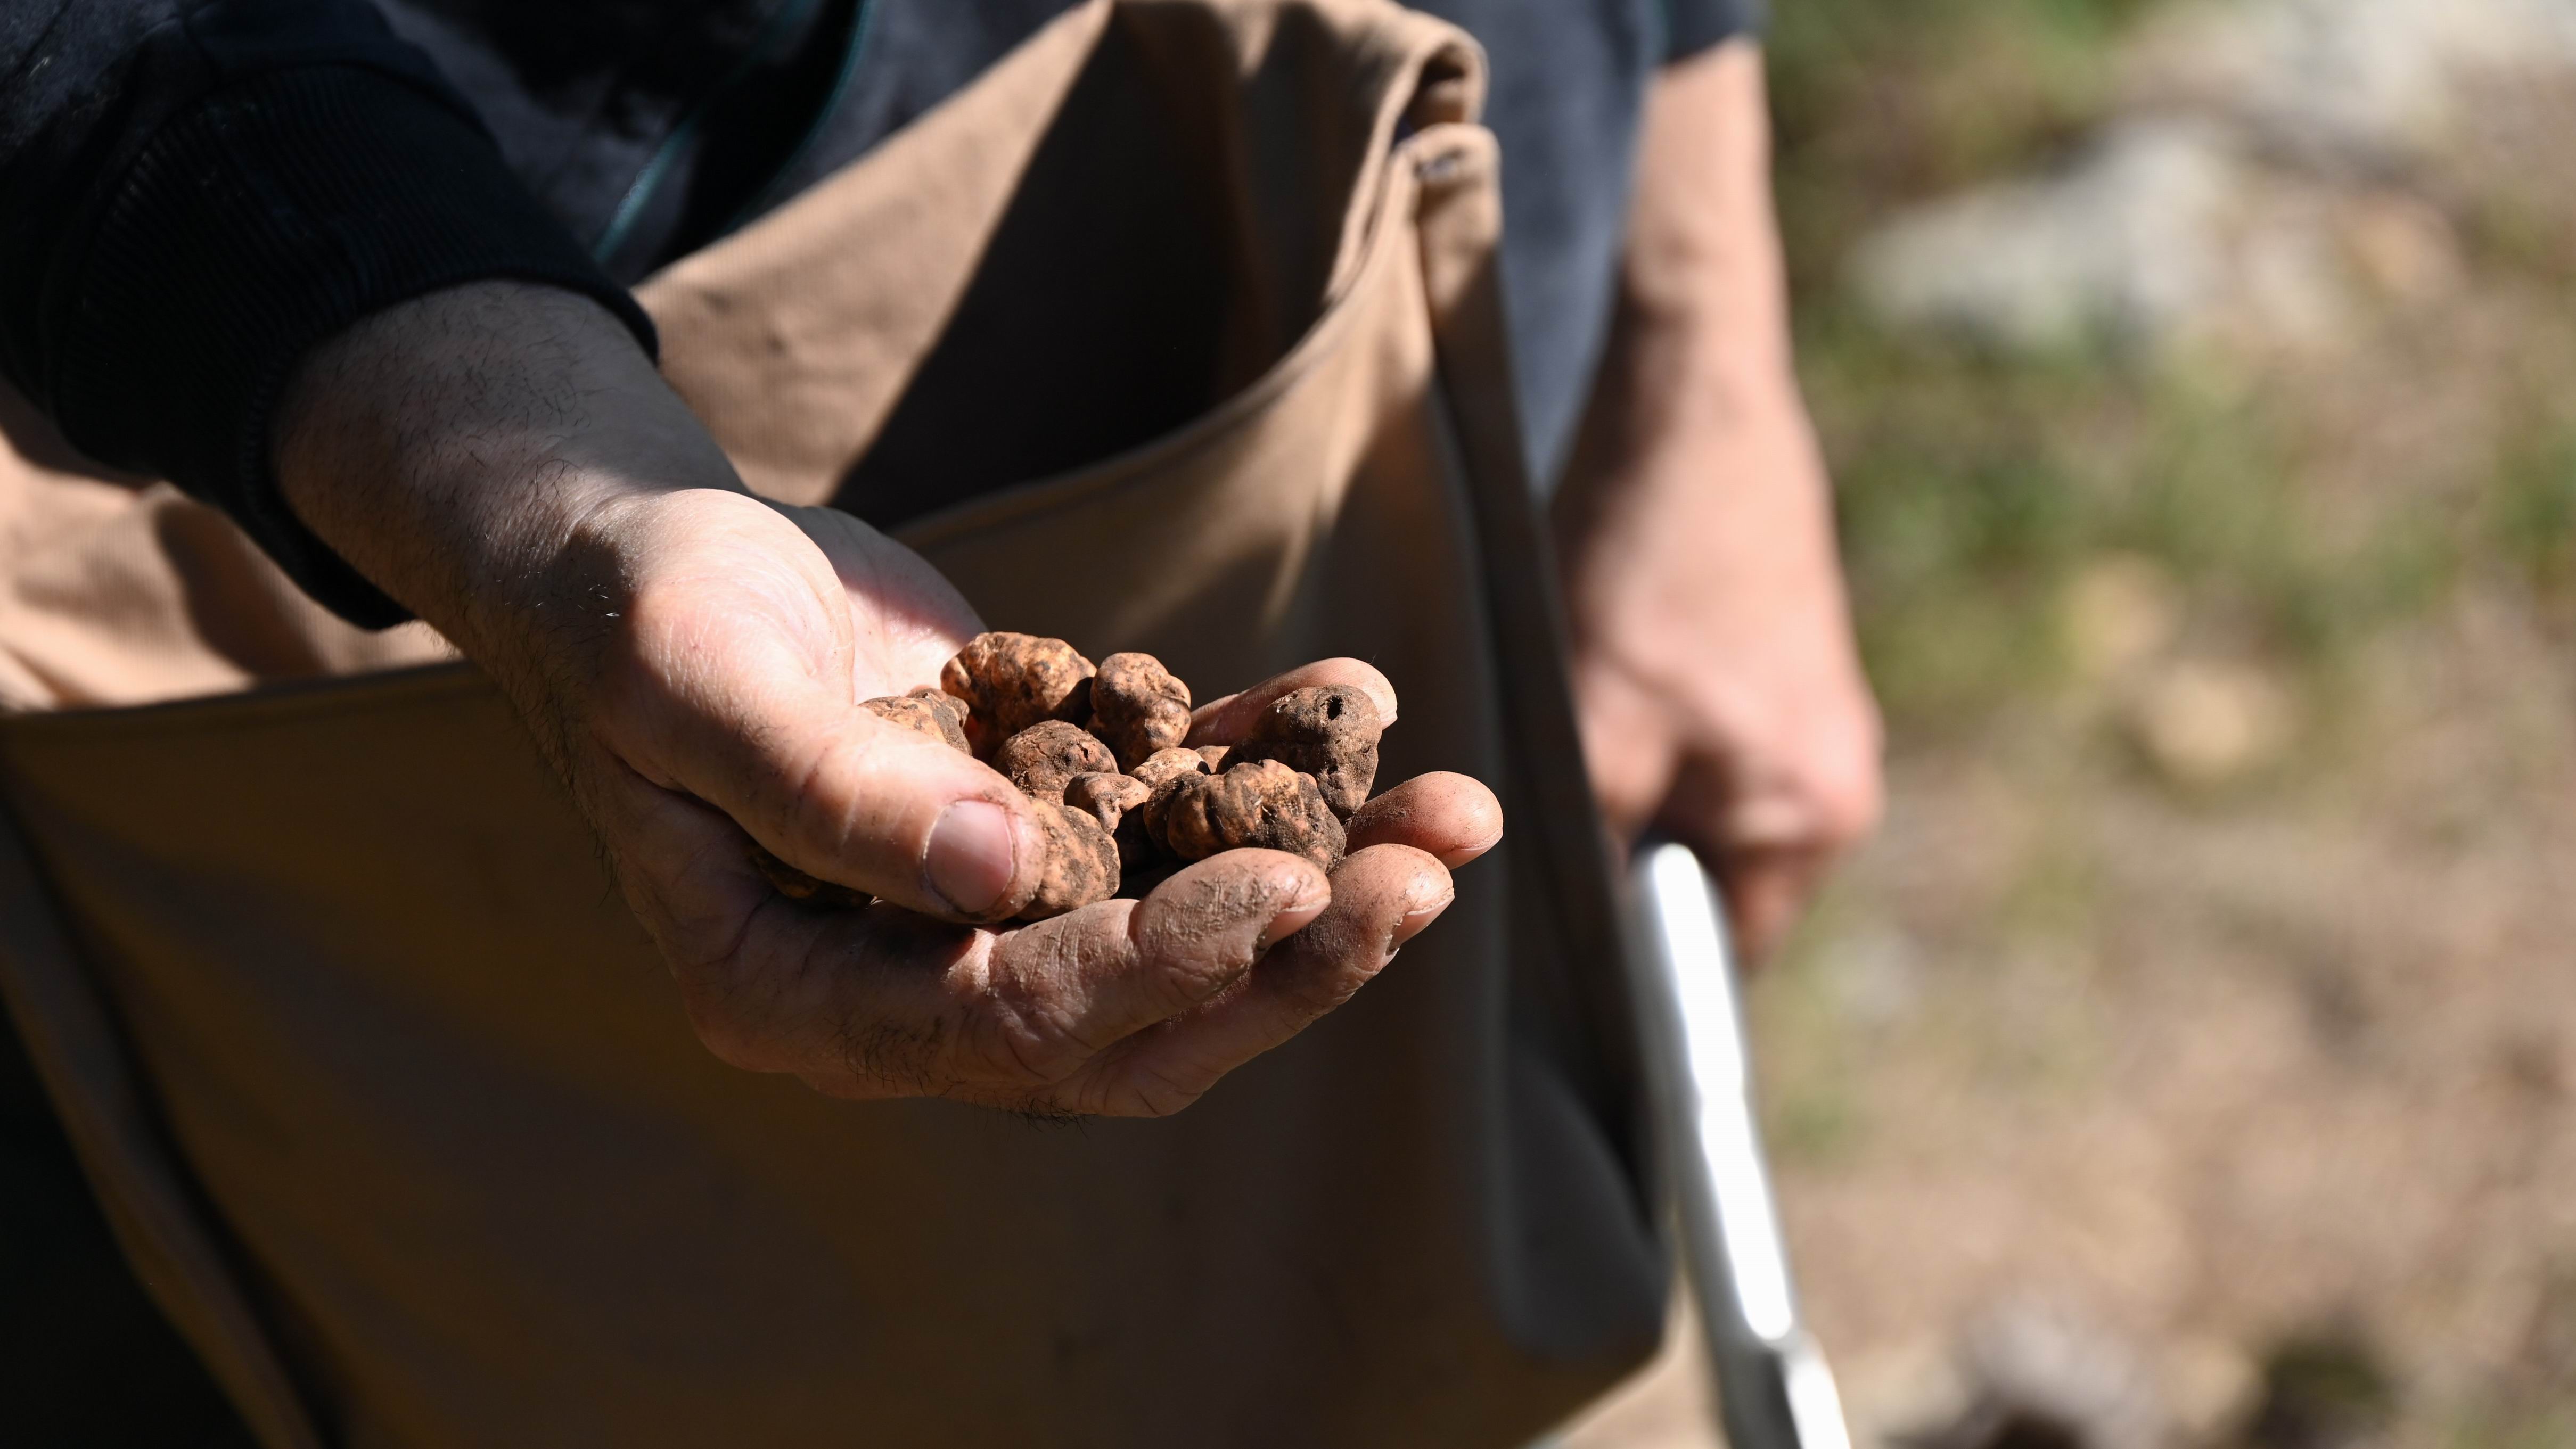 Truffle_hunting_experience_in_Sicily.JPG